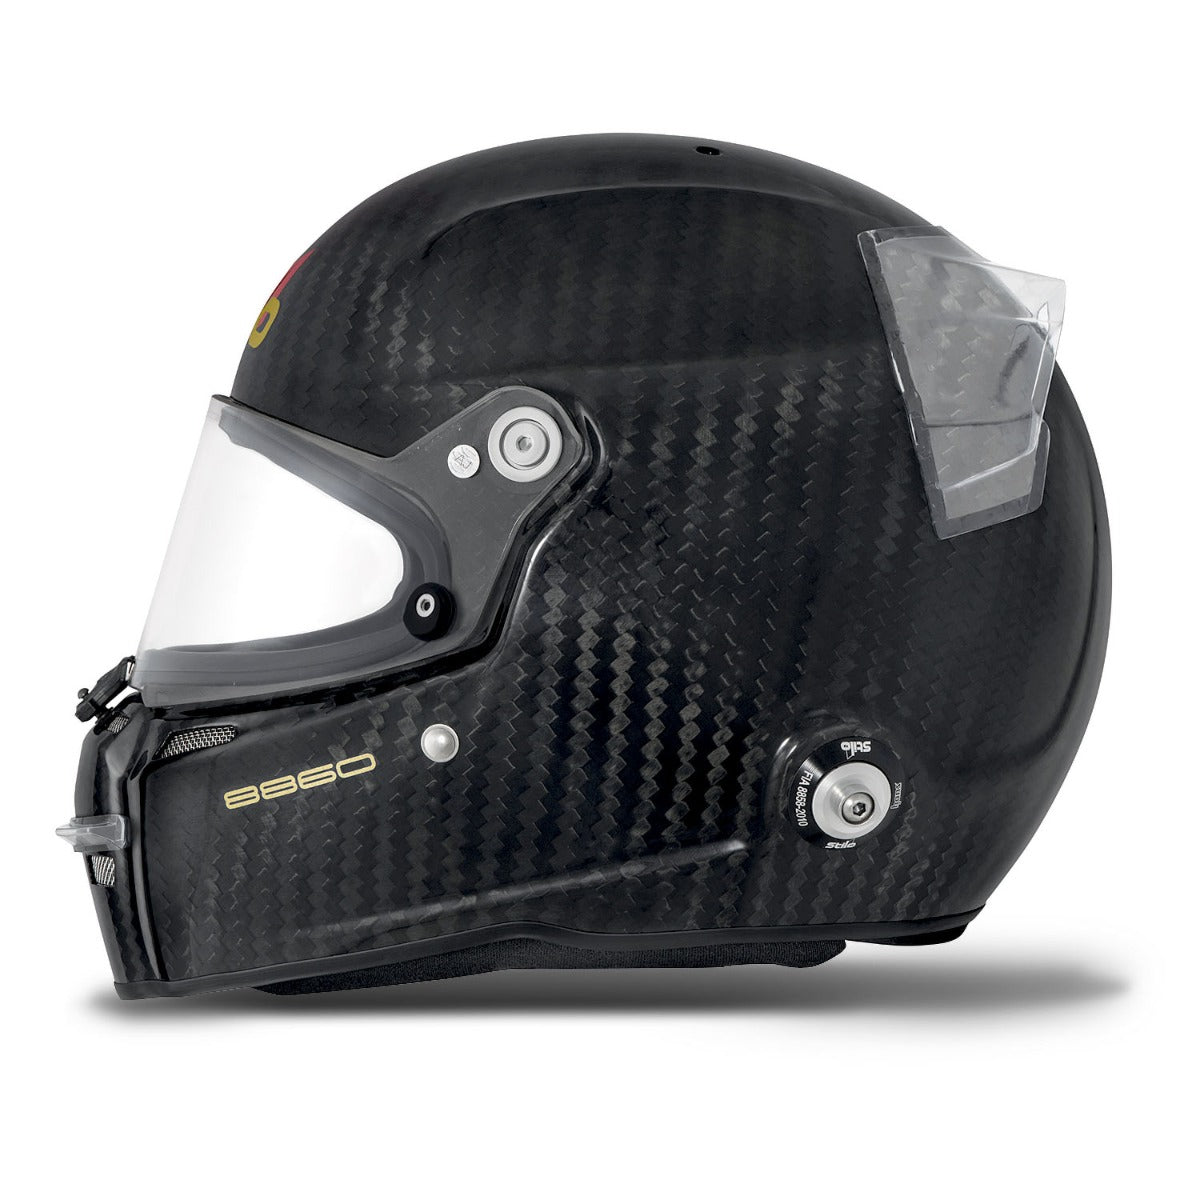 Stilo ST5 FN ABP 8860-2018 Carbon Fiber Helmet IN STOCK WITH THE BIGGEST DISCOUNTS AND LOWEST PRICES FOR THE BEST DEAL ON Stilo ST5 FN ABP 8860-2018 Carbon Fiber Helmet SIDE IMAGE